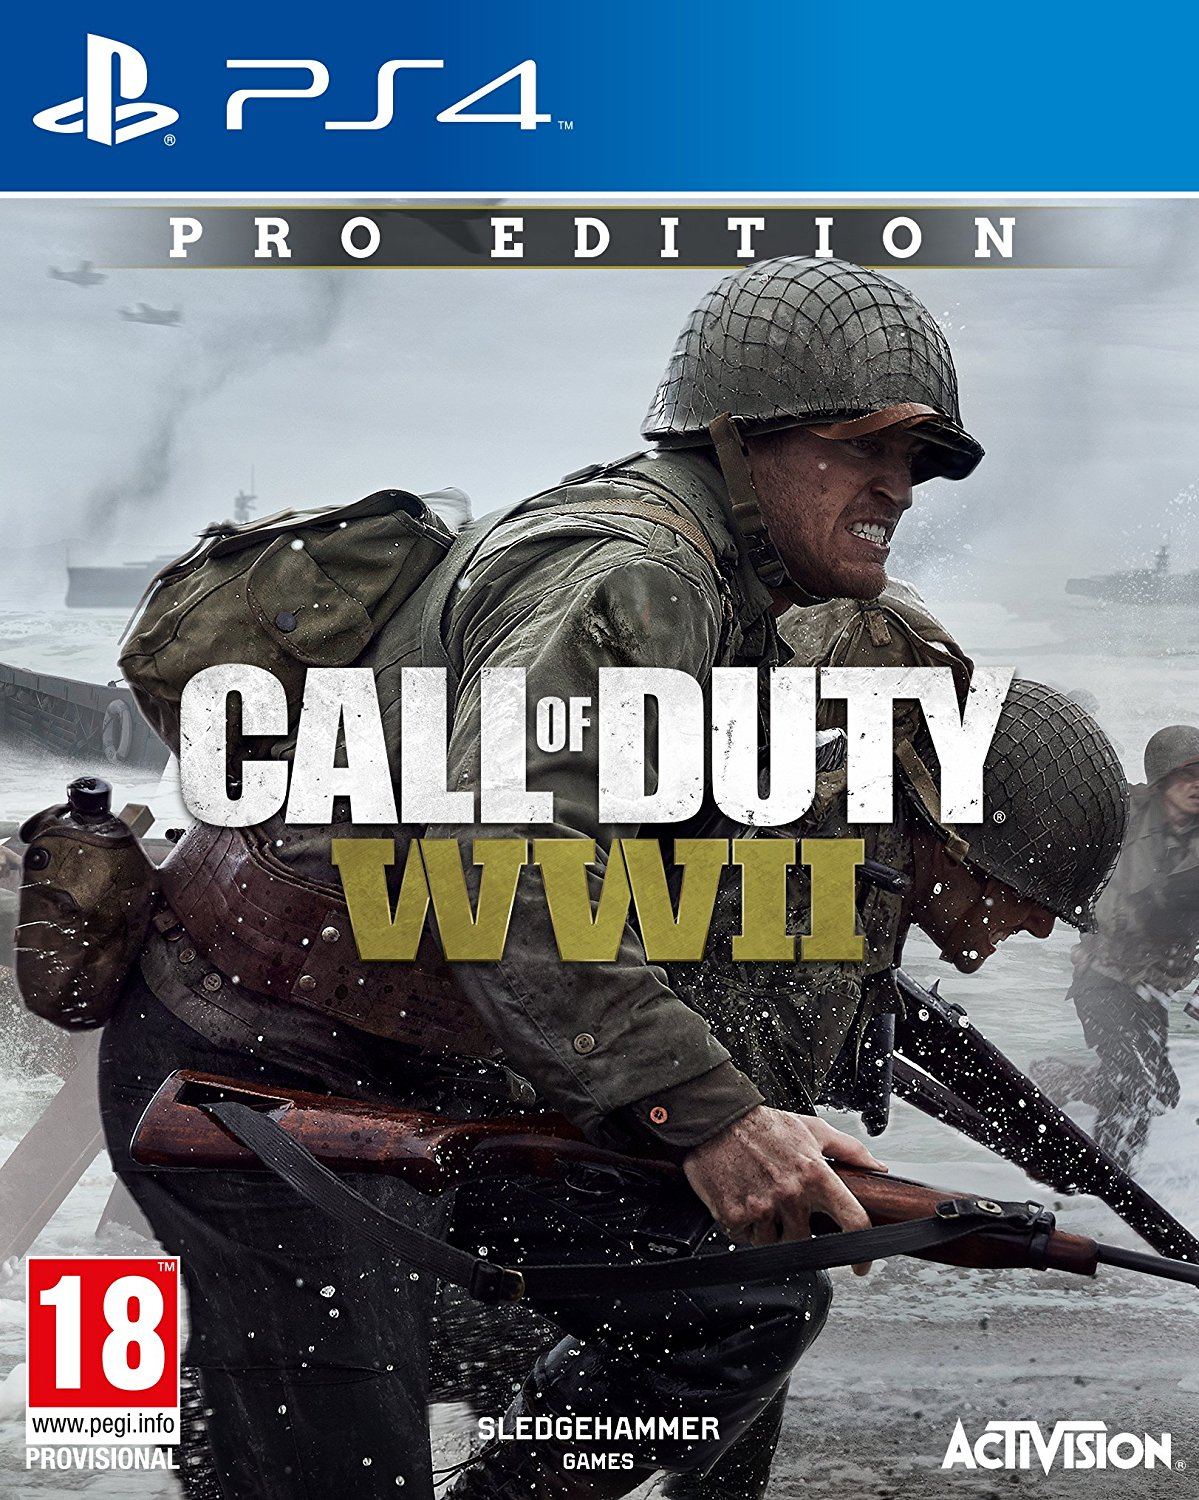 of Duty: WWII [Pro Edition] for PlayStation 4